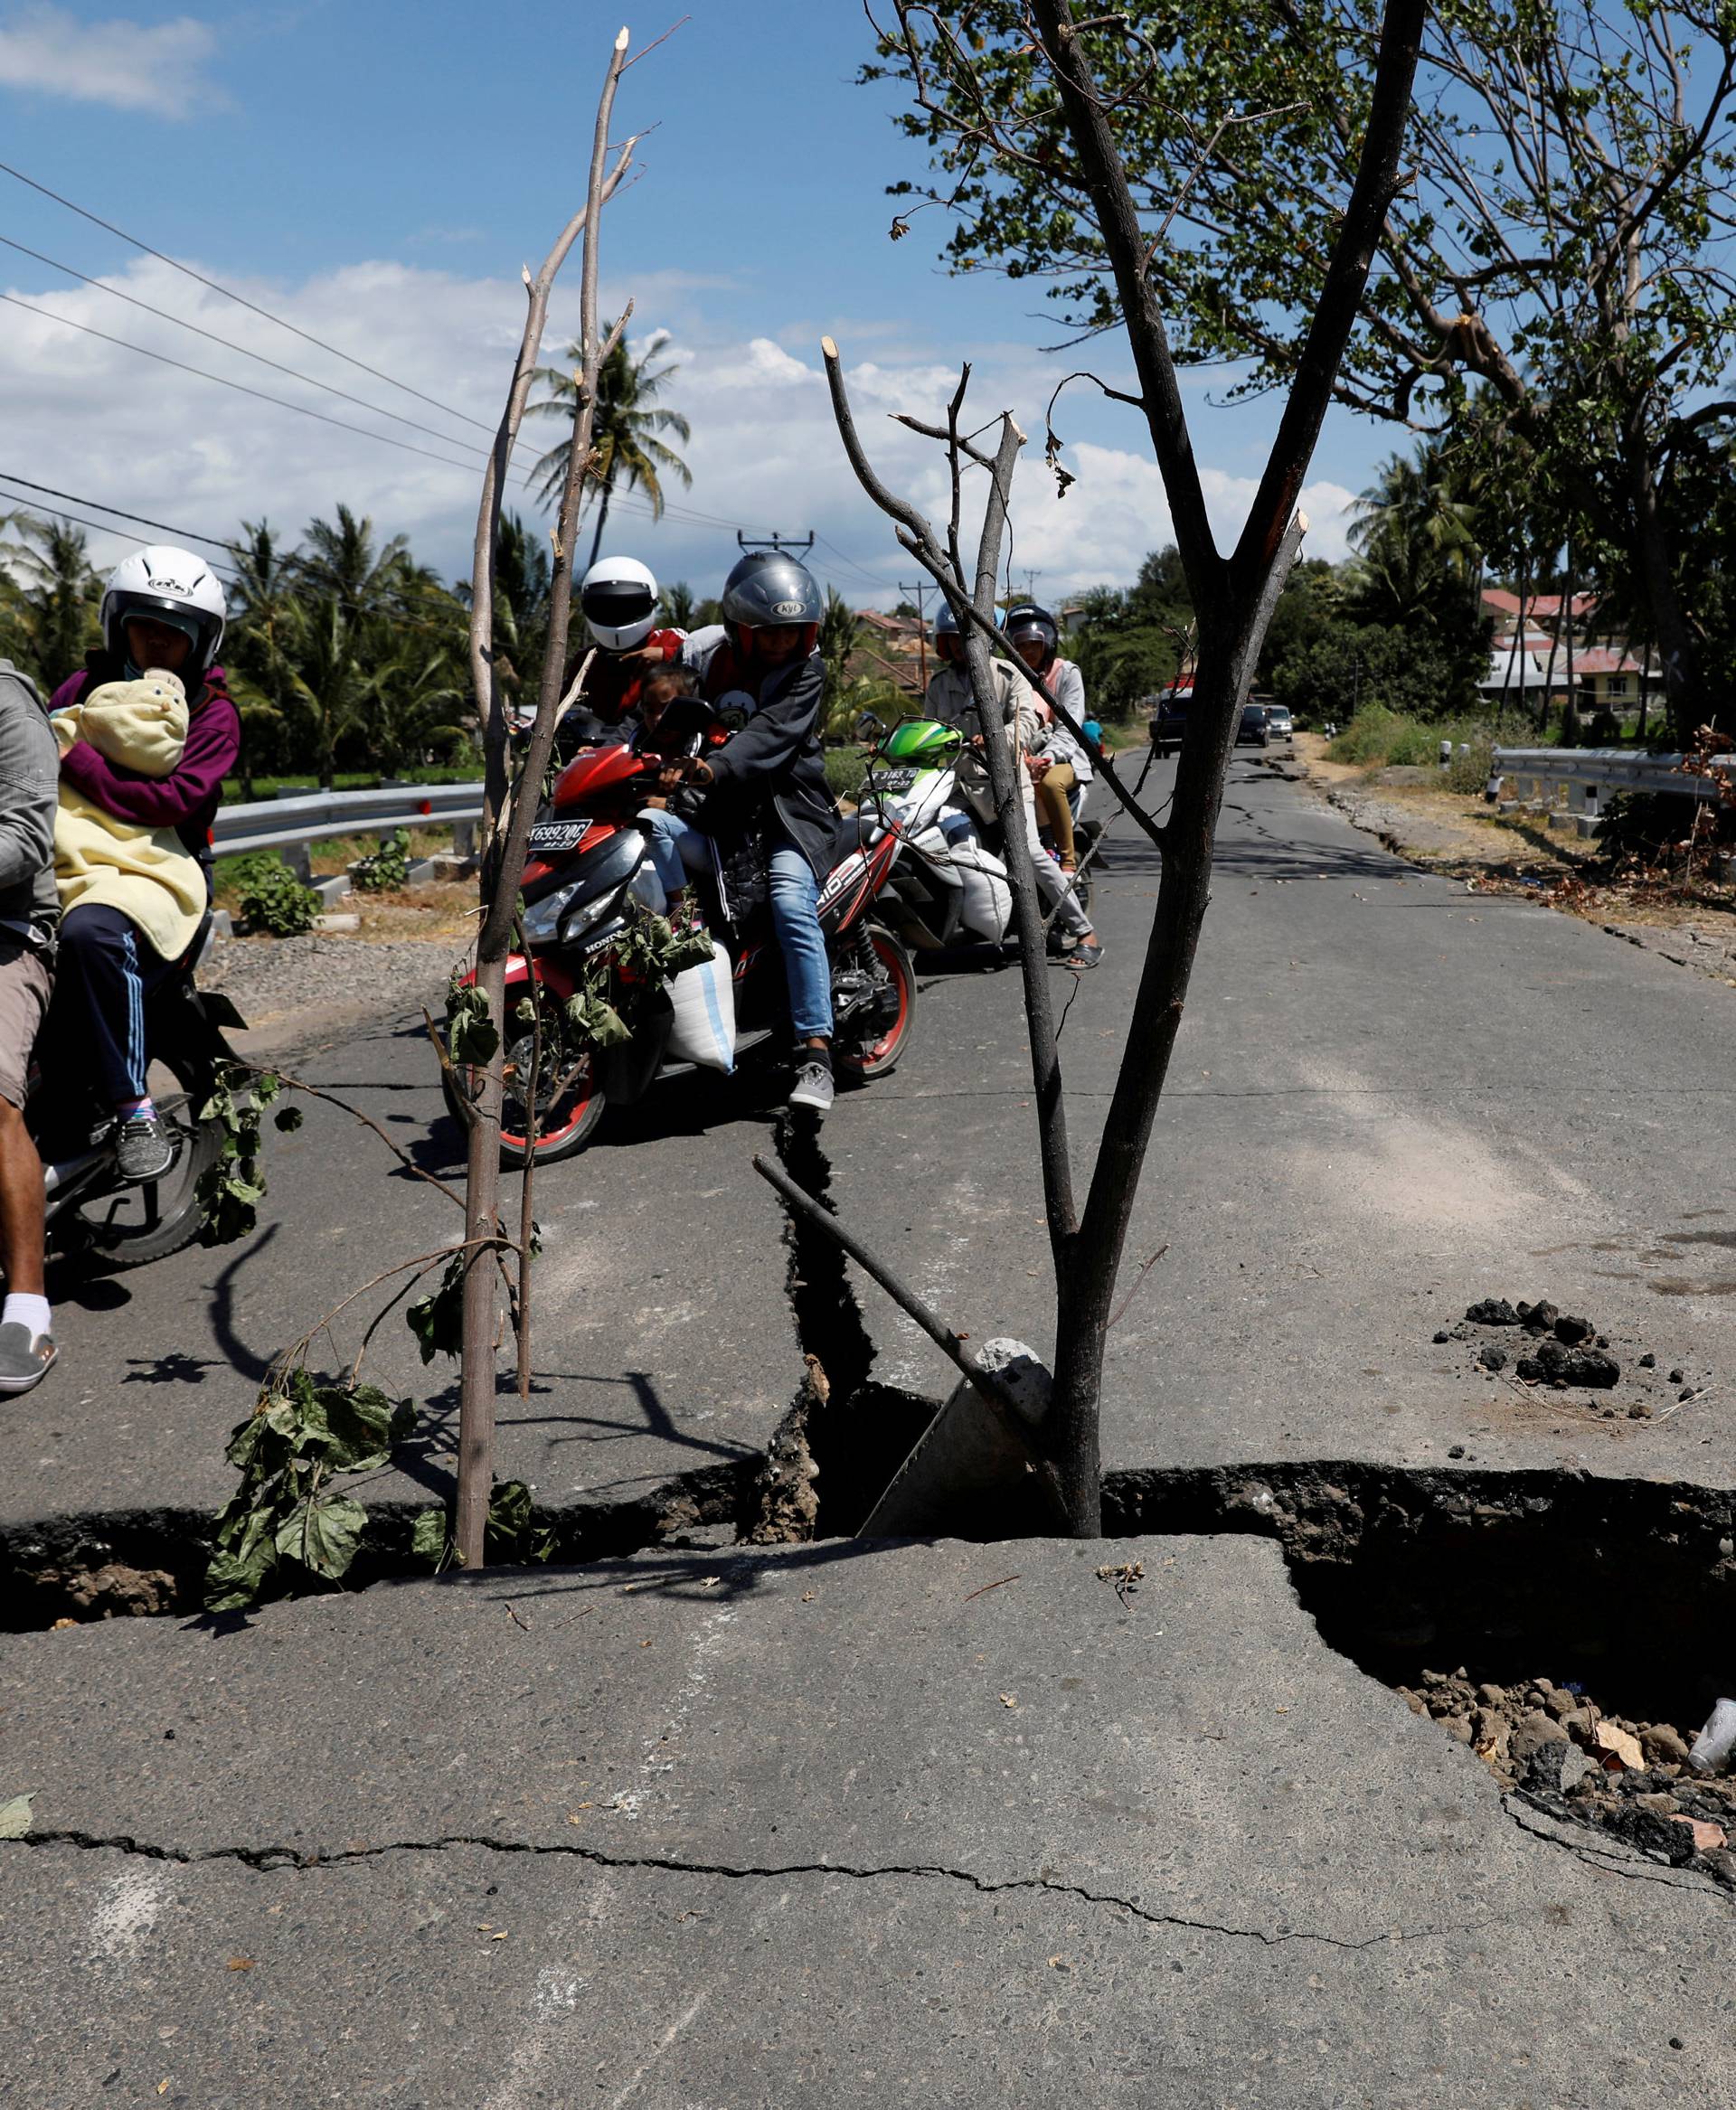 A family rides on a motorcycle through a crack on the street at Kayangan district after earthquake hit on Sunday in North Lombok